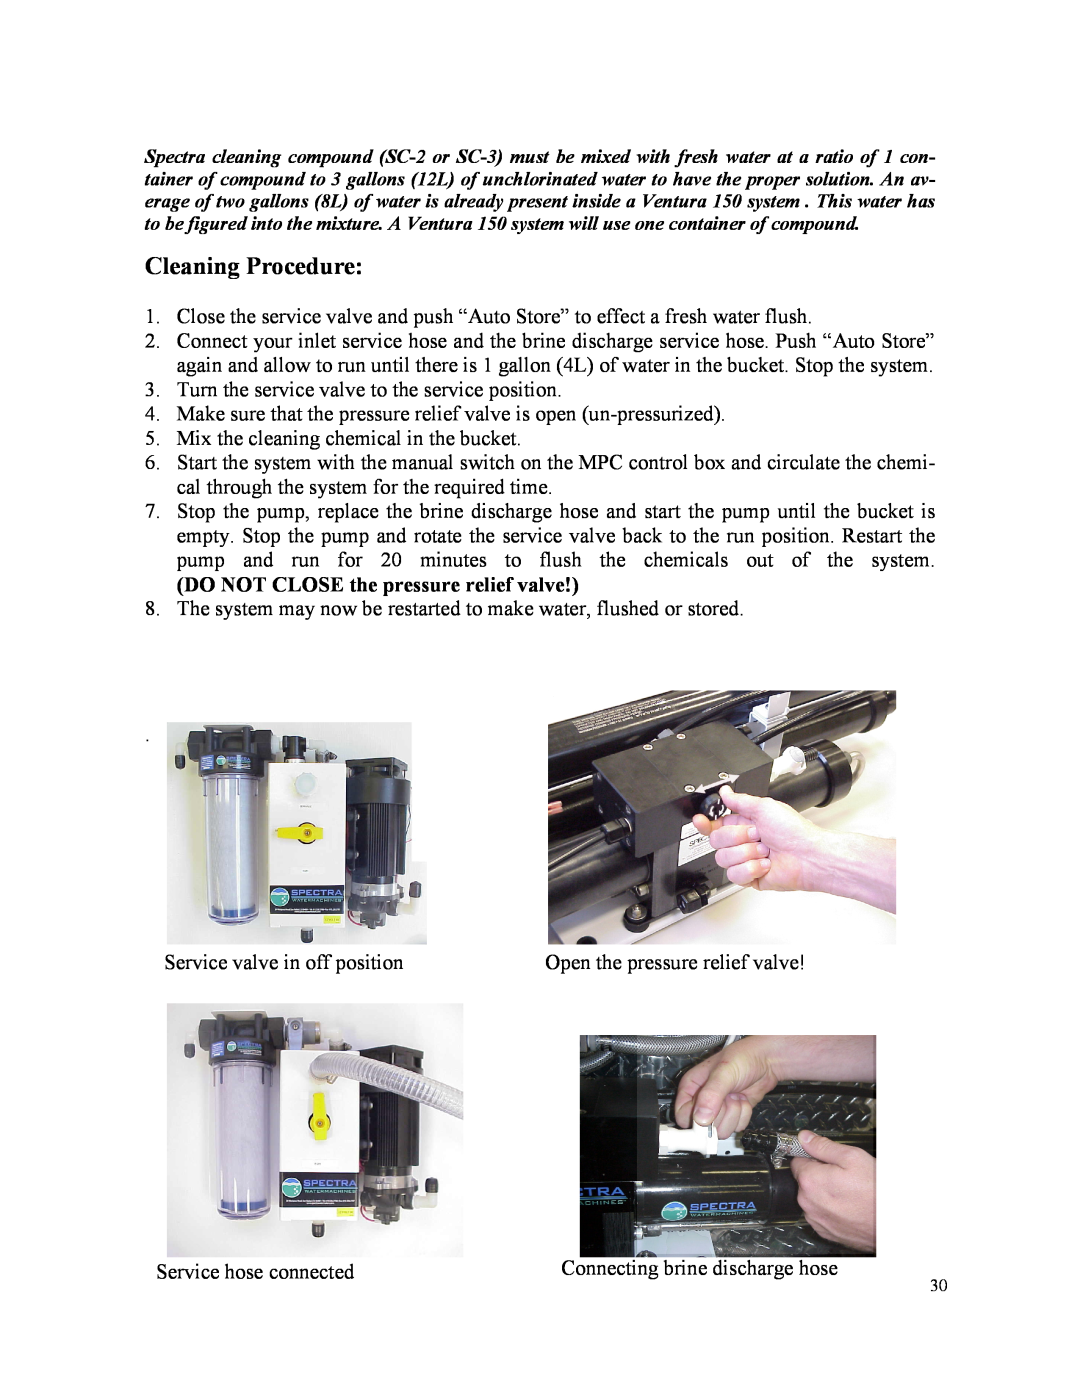 Spectra Watermakers MPC-5000 owner manual Cleaning Procedure, DO NOT CLOSE the pressure relief valve 